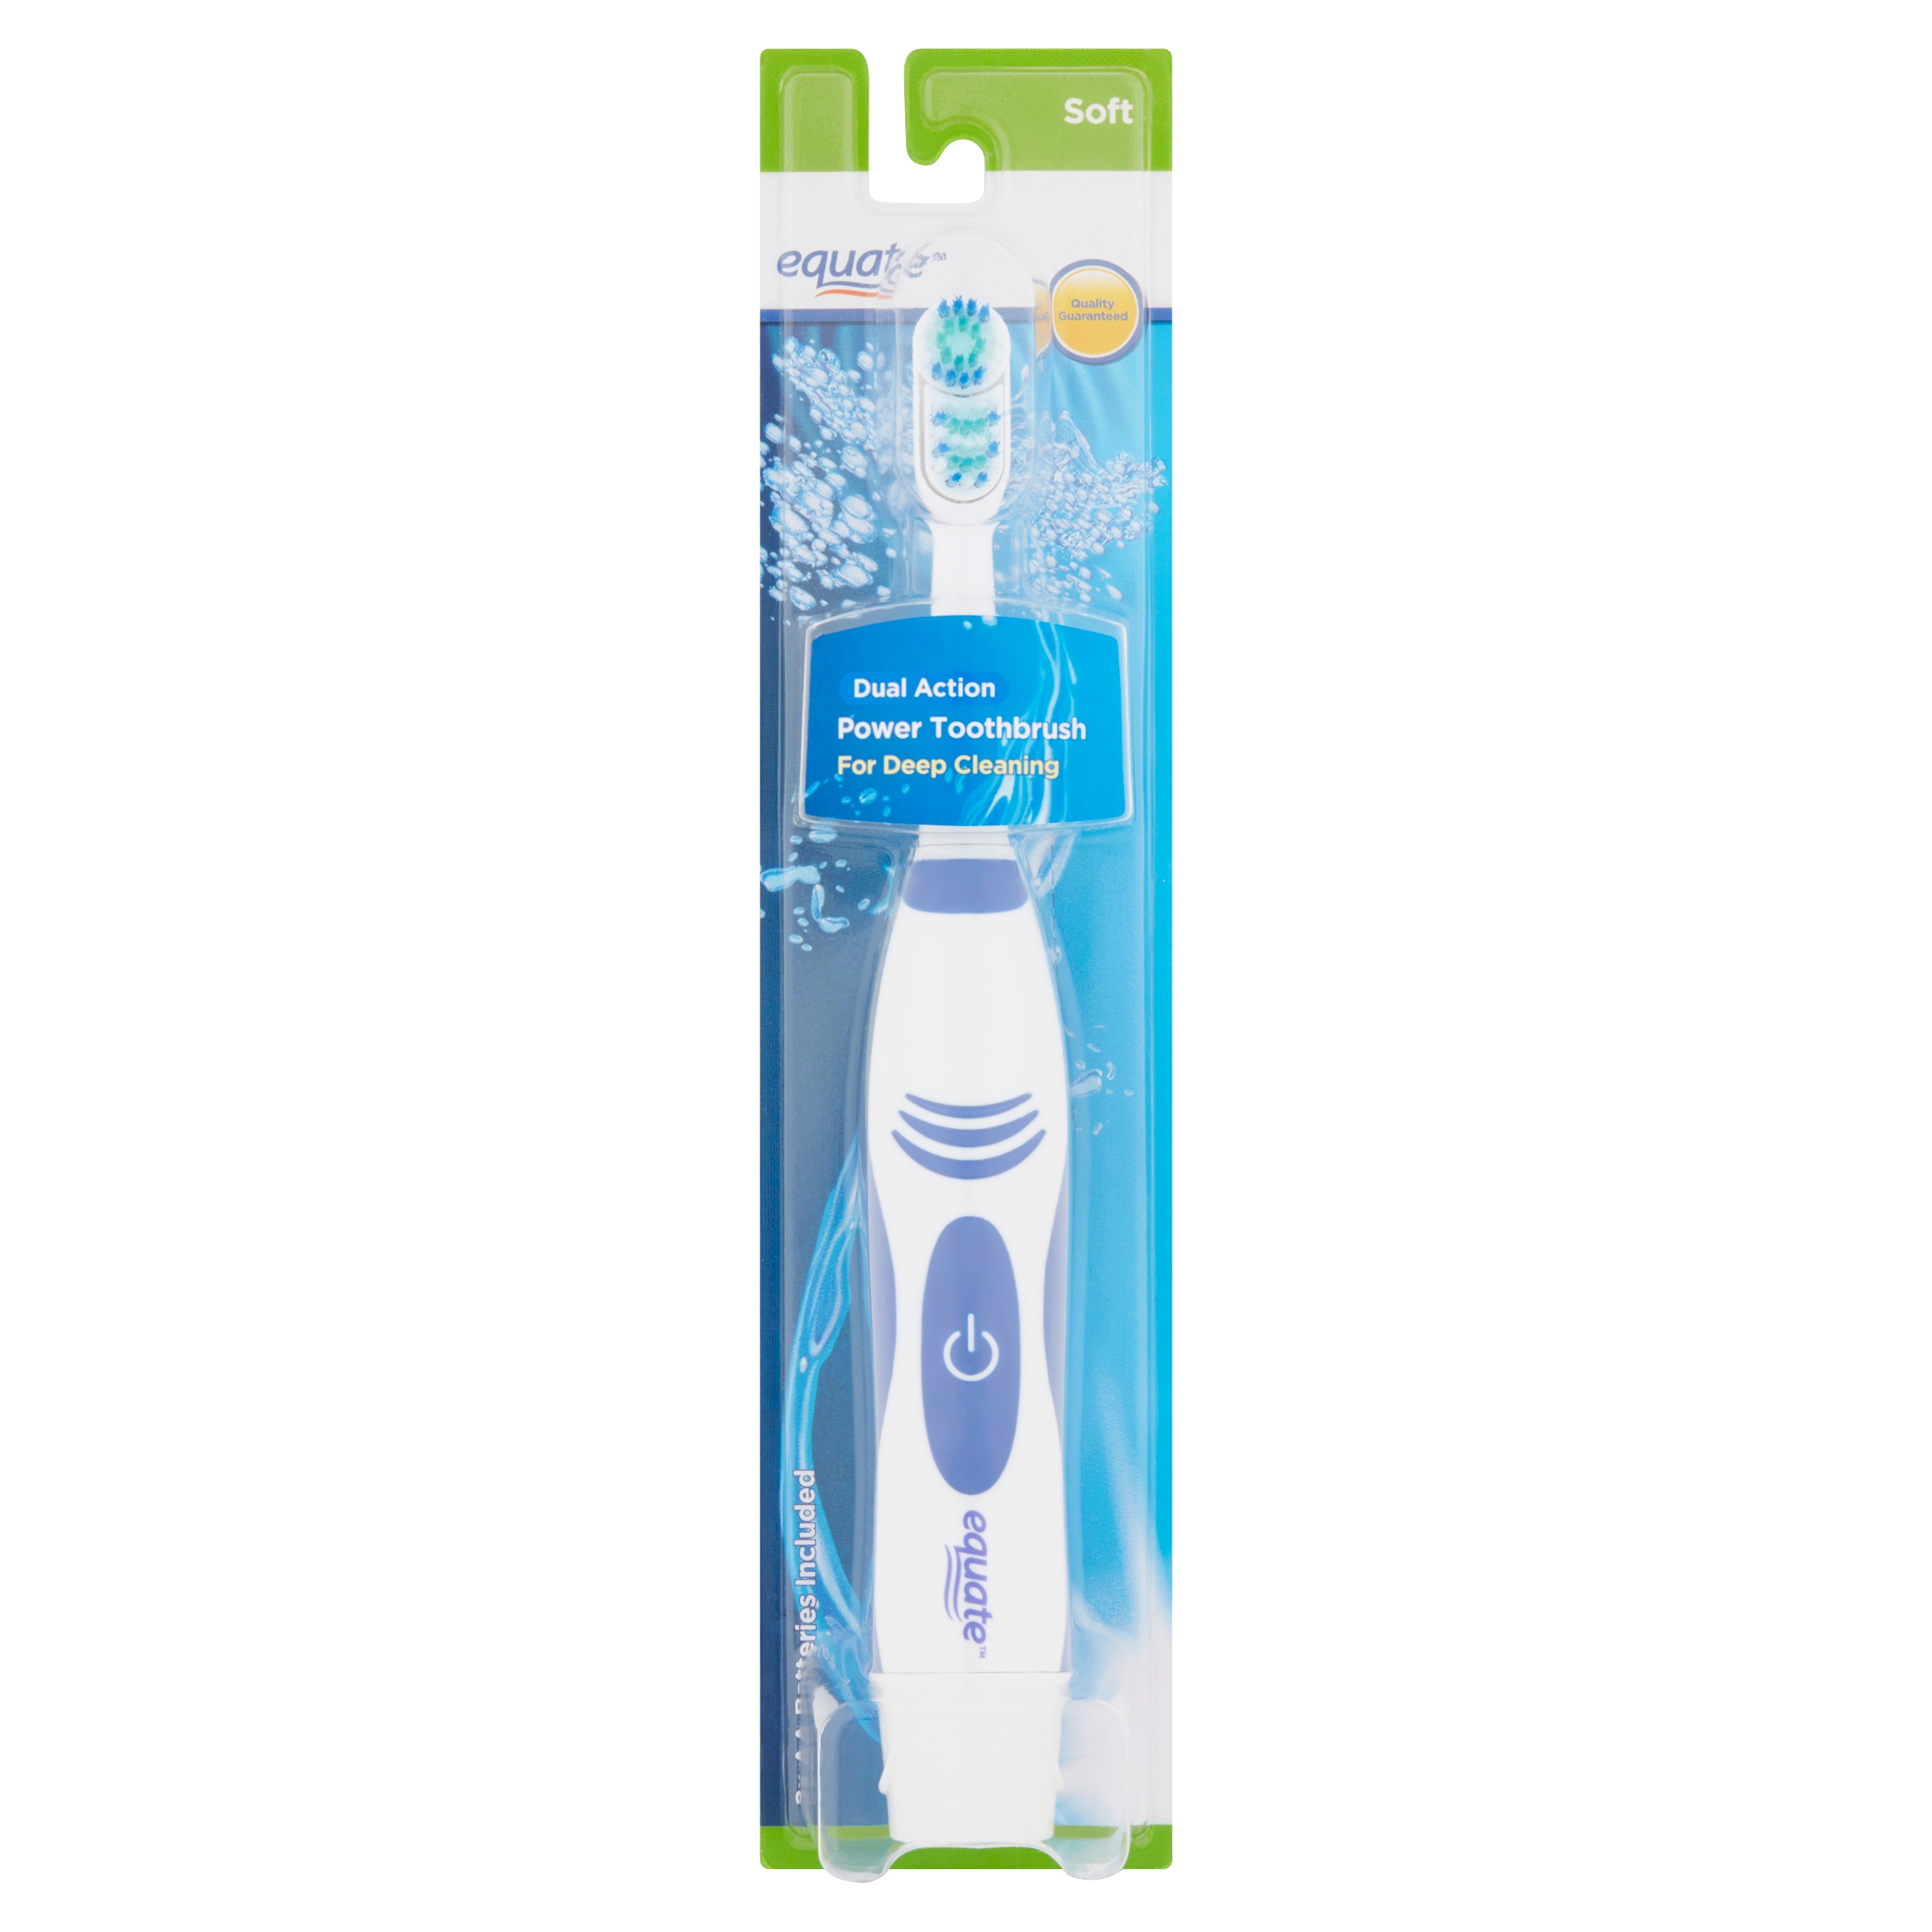 Equate soft dual action power toothbrush for deep cleaning, 1 count - image 3 of 9